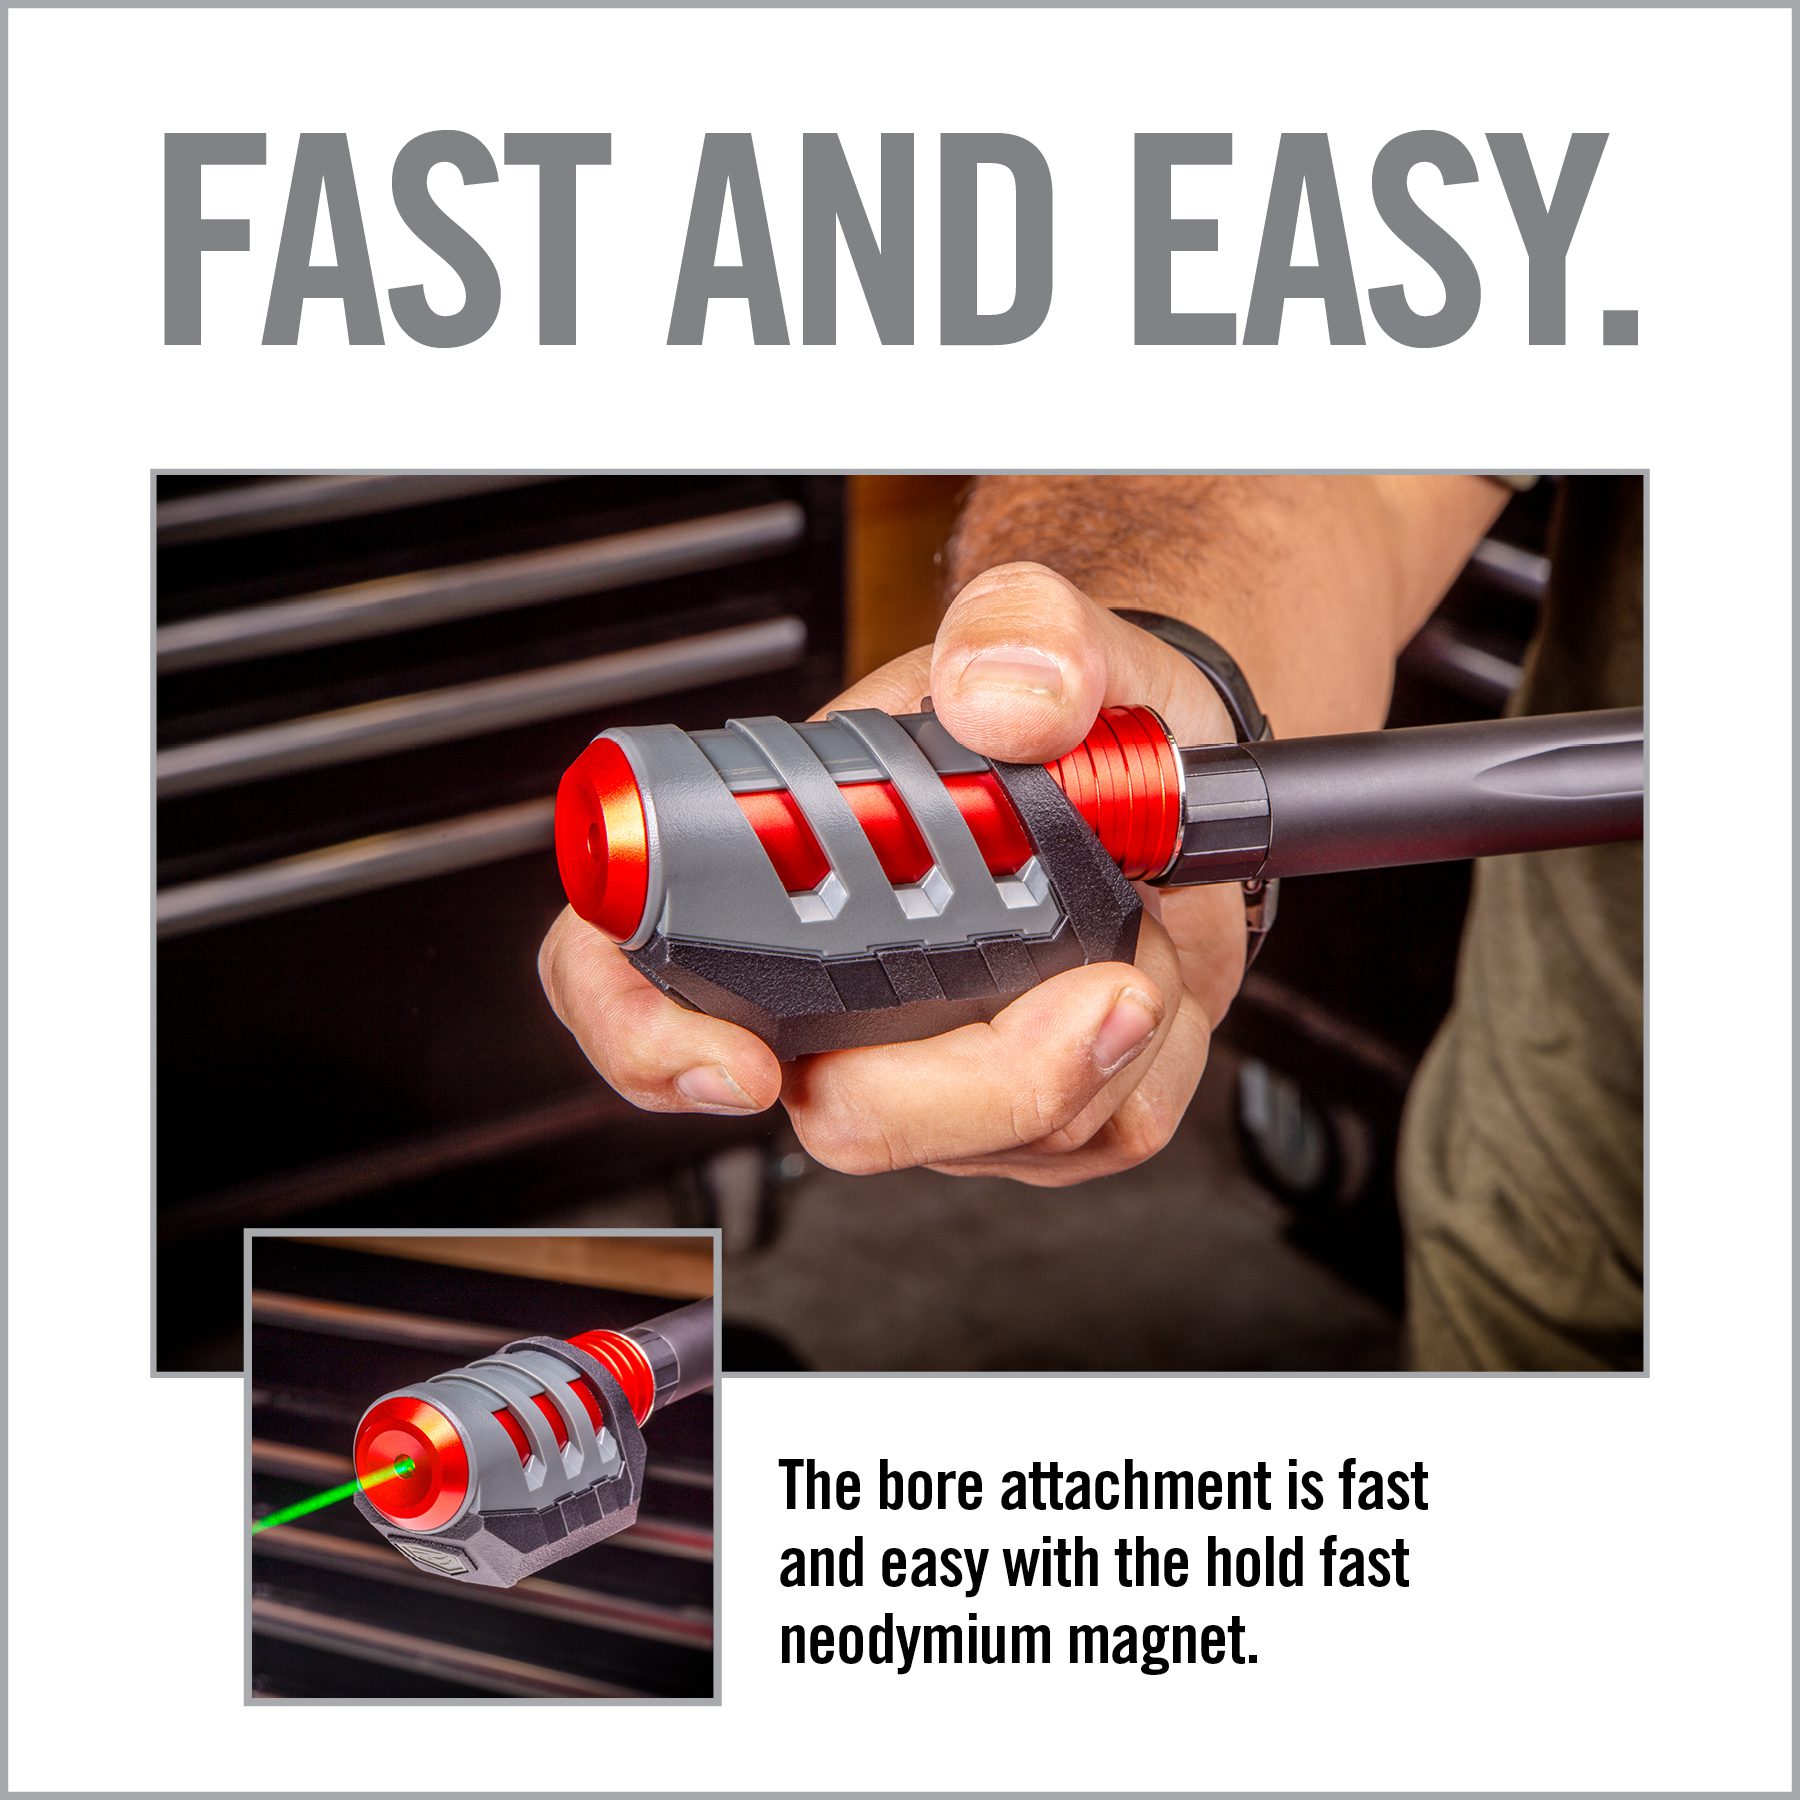 an advertisement for a fast and easy tool